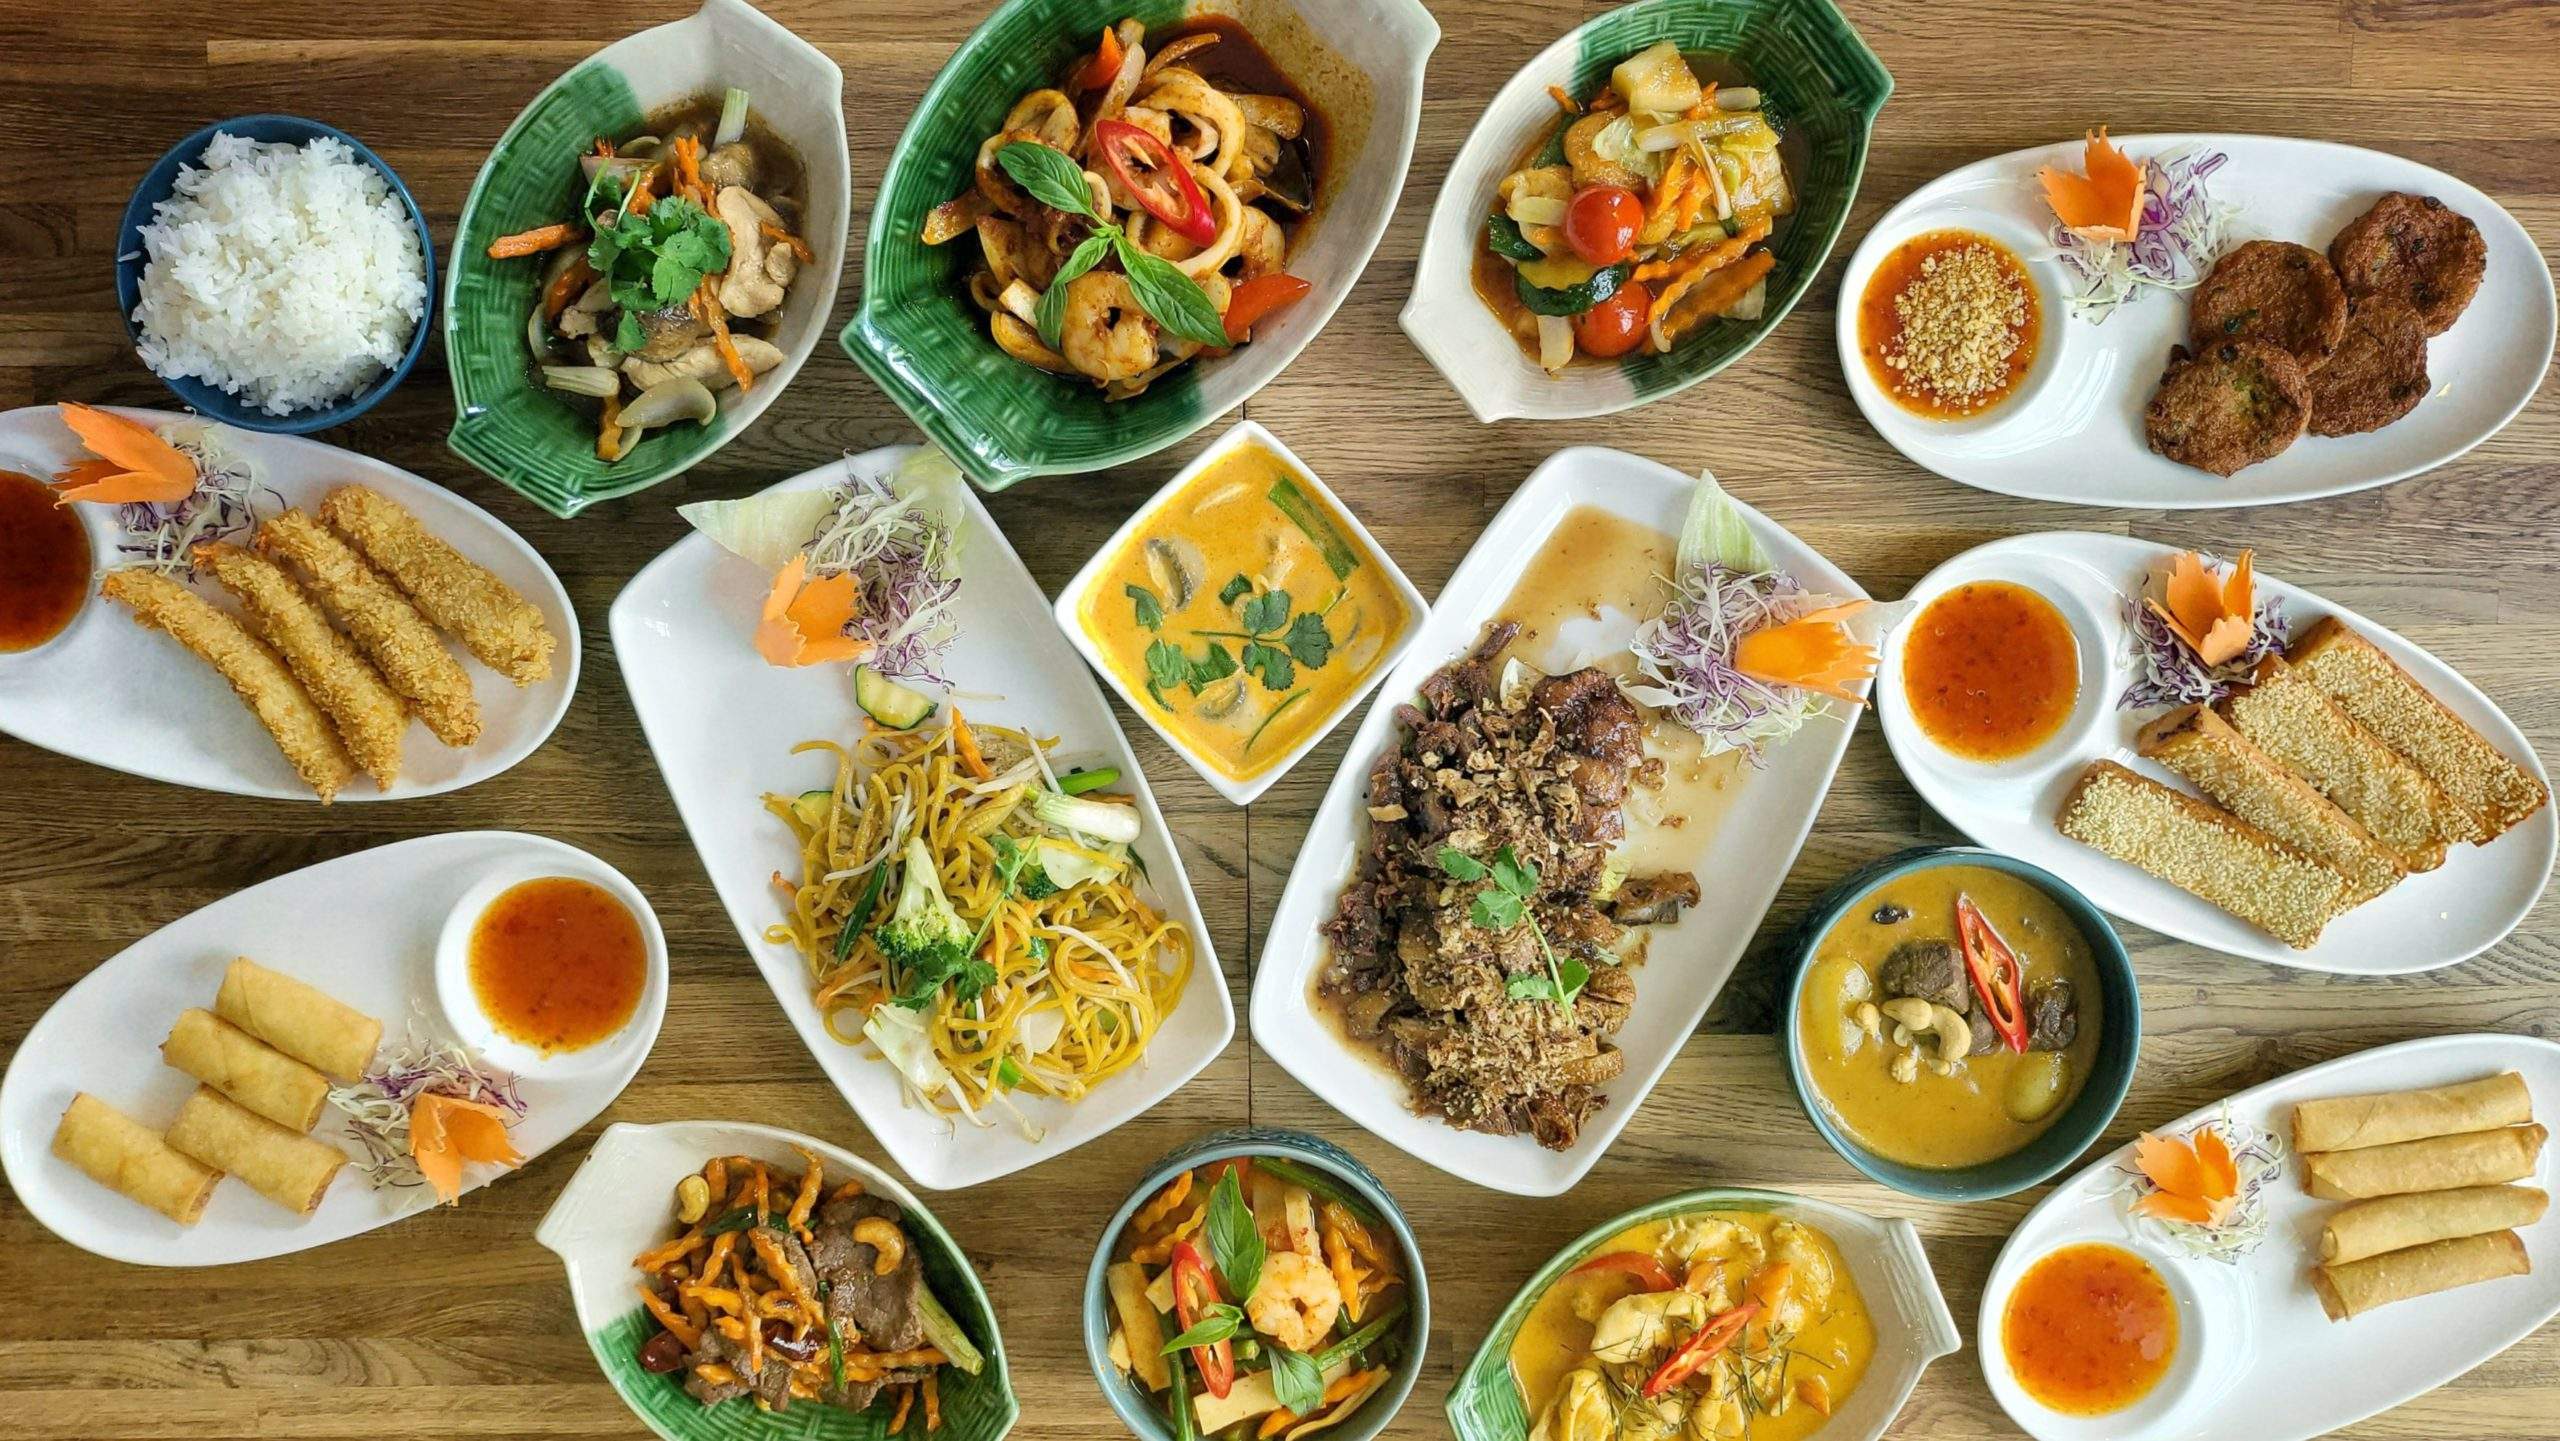 Table with selection of dishes from One Thai Restaurant, showing curries, starters and stir fries, including tempura prawns, fish cakes, Seafood stir fry and prawn on toast among 15 dishes.